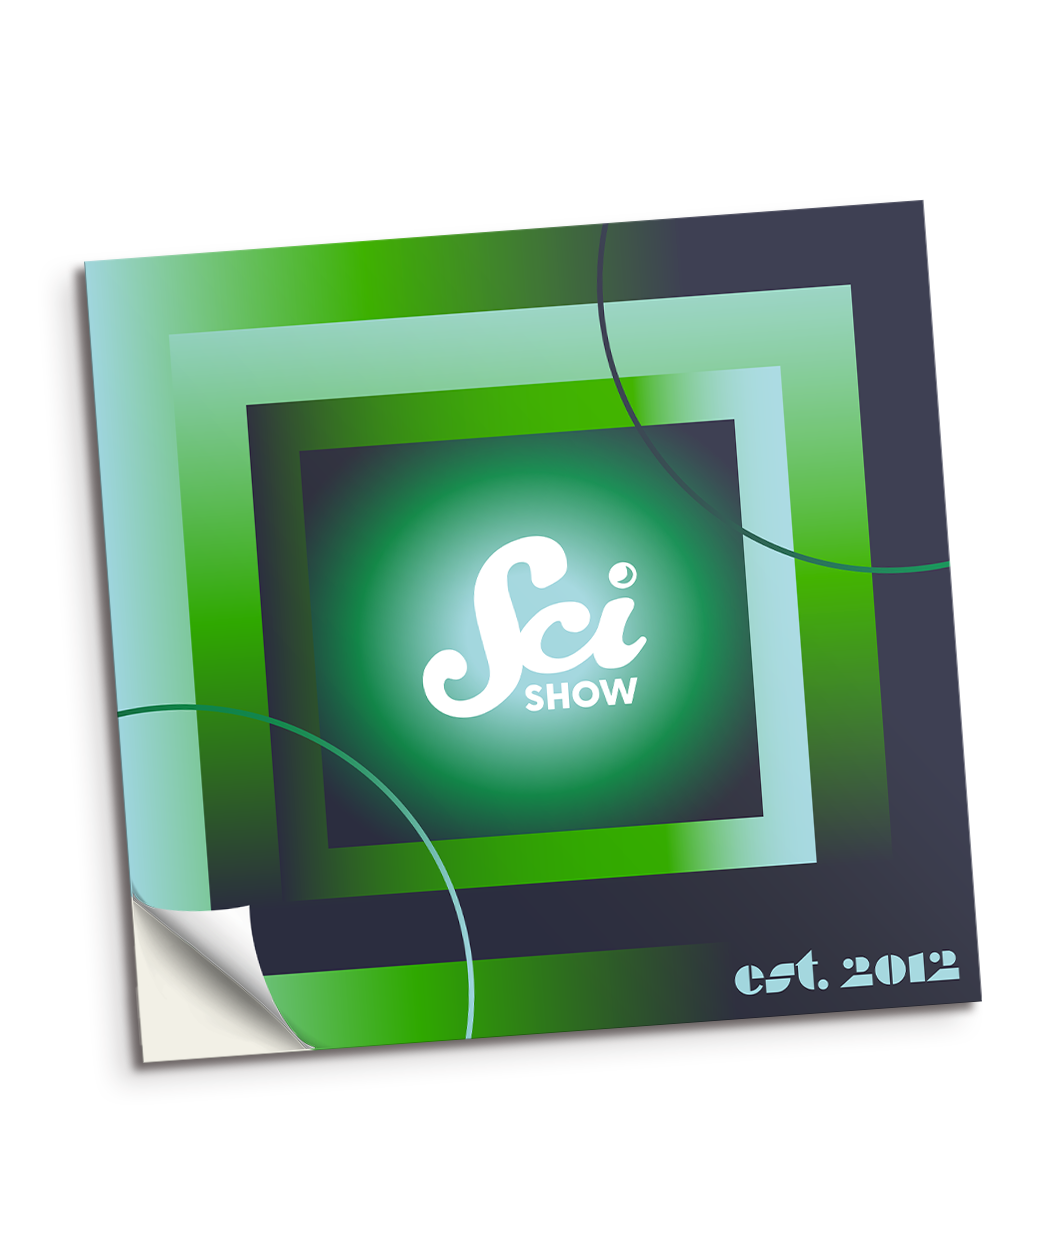 A square Scishow decal in dark blue and green gradients with the Scishow logo in white in the middle of the decal. Small text in the bottom right corner reads "est. 2012". 